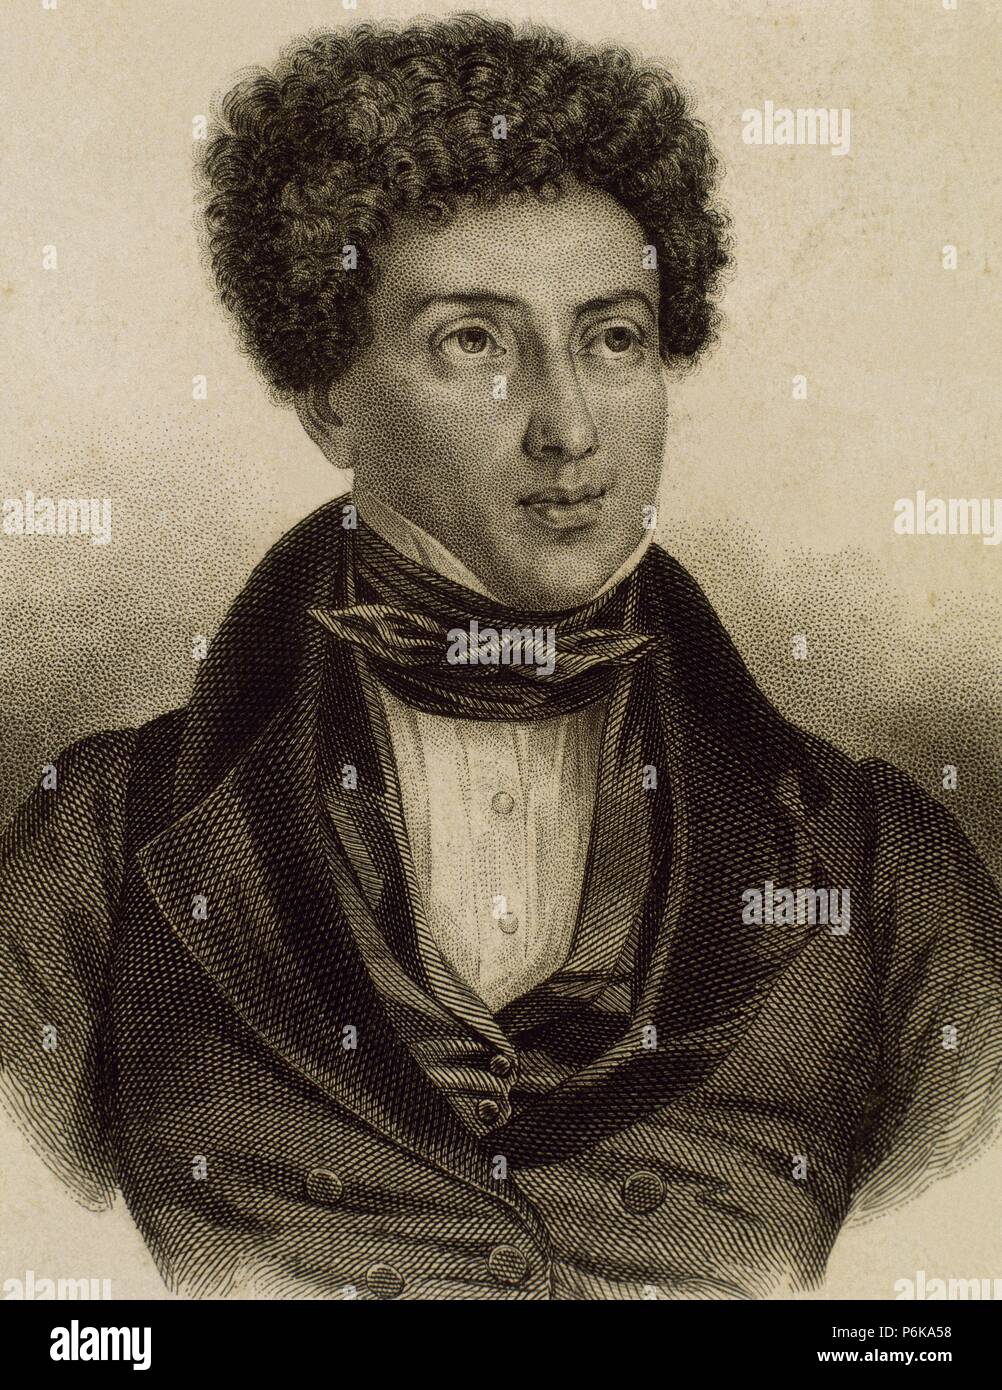 Alexandre Dumas (1802-1870). French writer. Romanticism and Historical ...